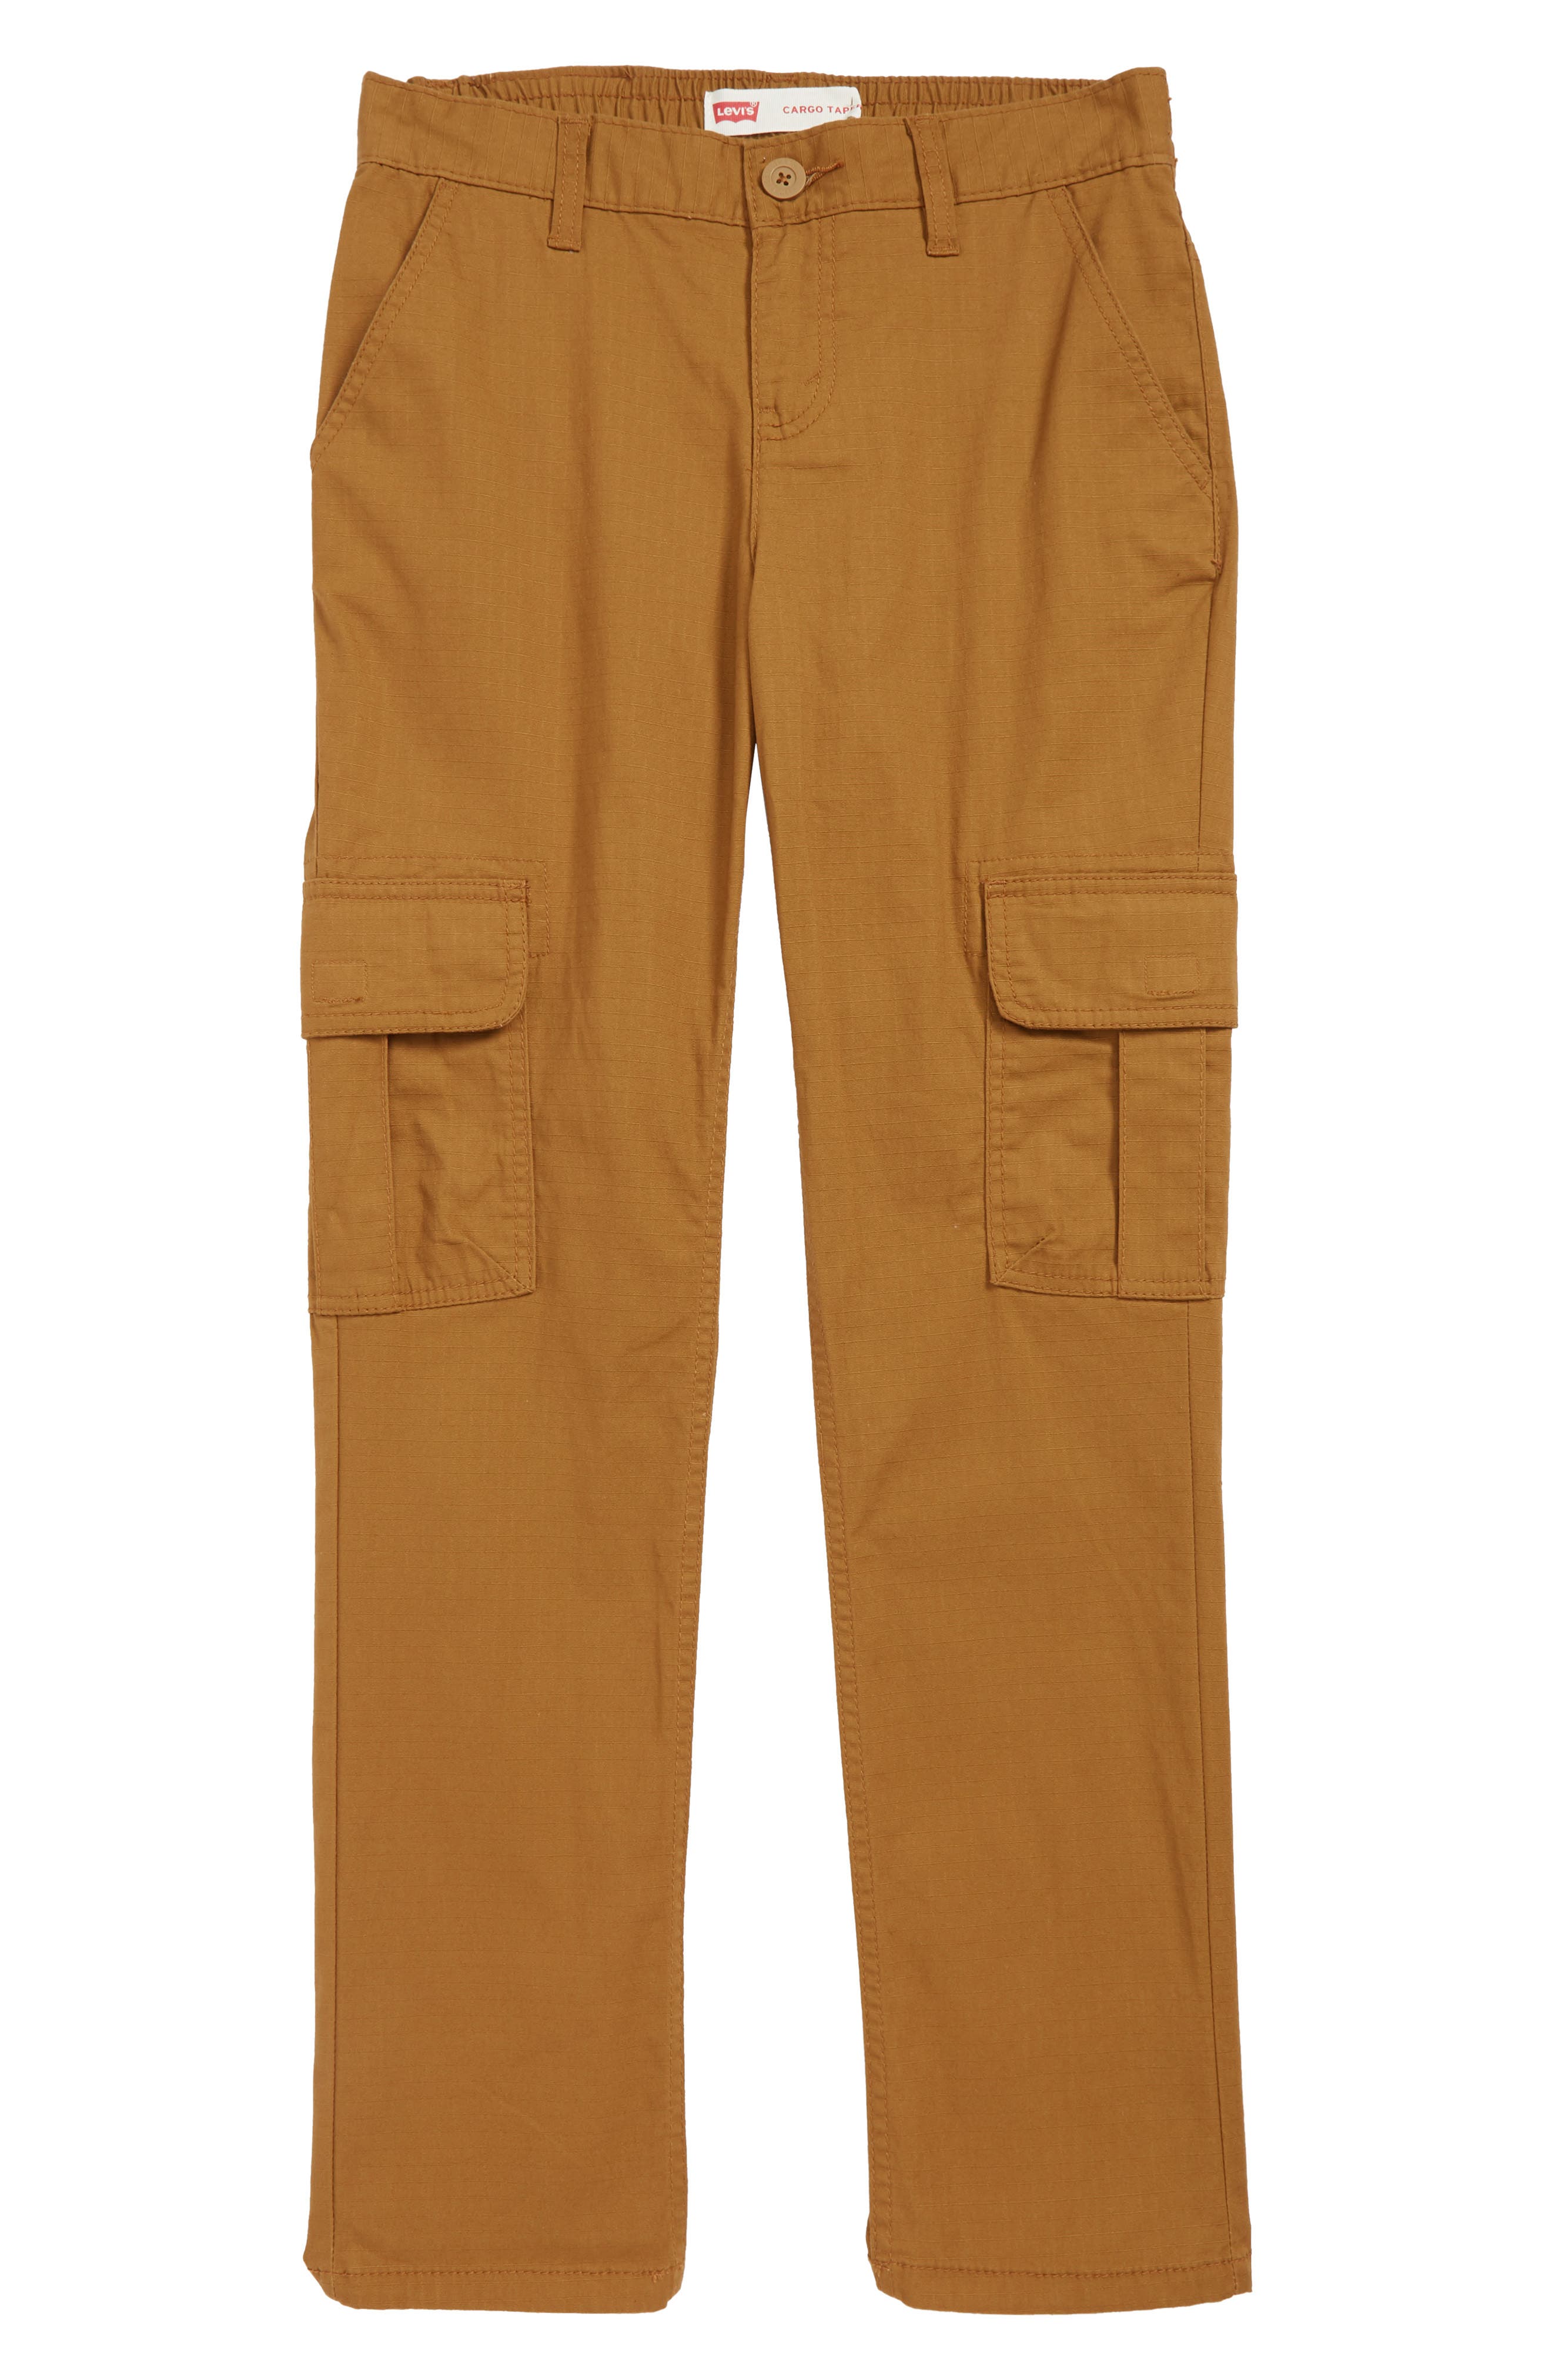 UPC 617847156847 product image for Boy's Levi'S Stretch Cargo Tapered Pants, Size 16 - Beige | upcitemdb.com